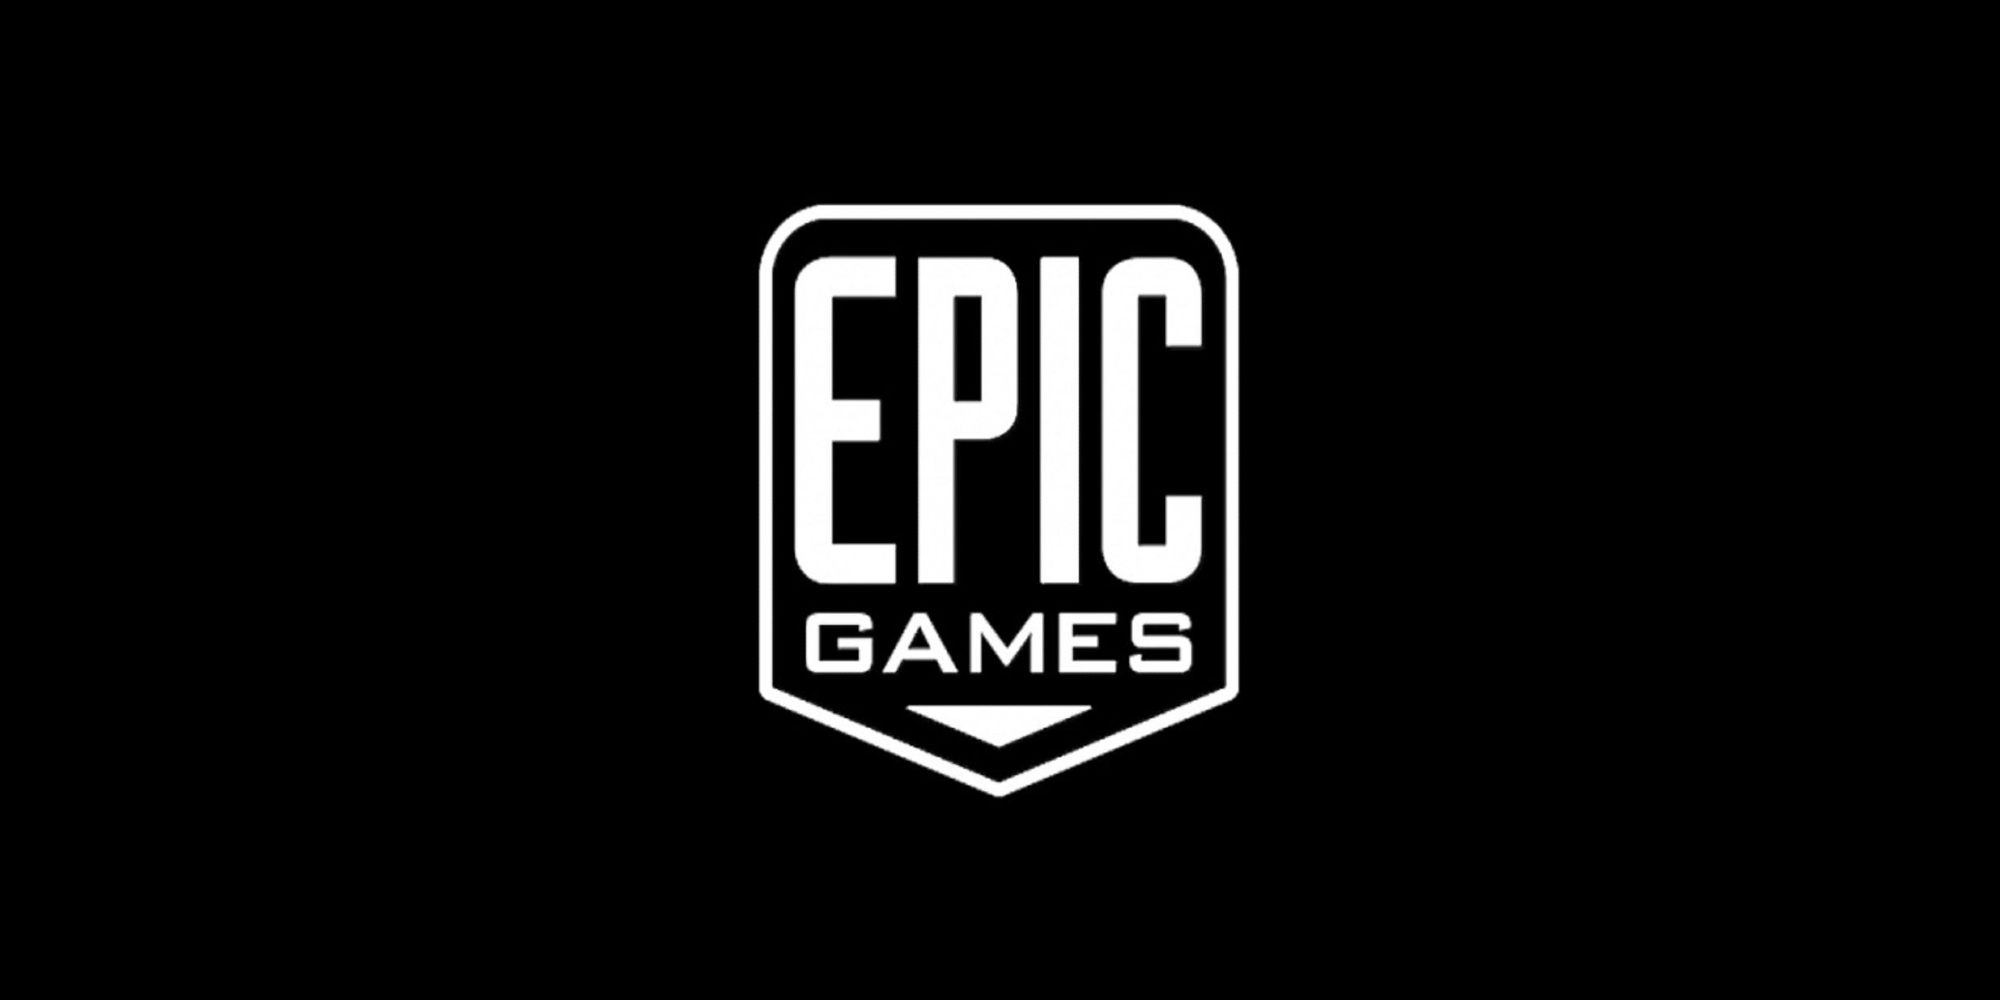 Epic Games logo in black and white